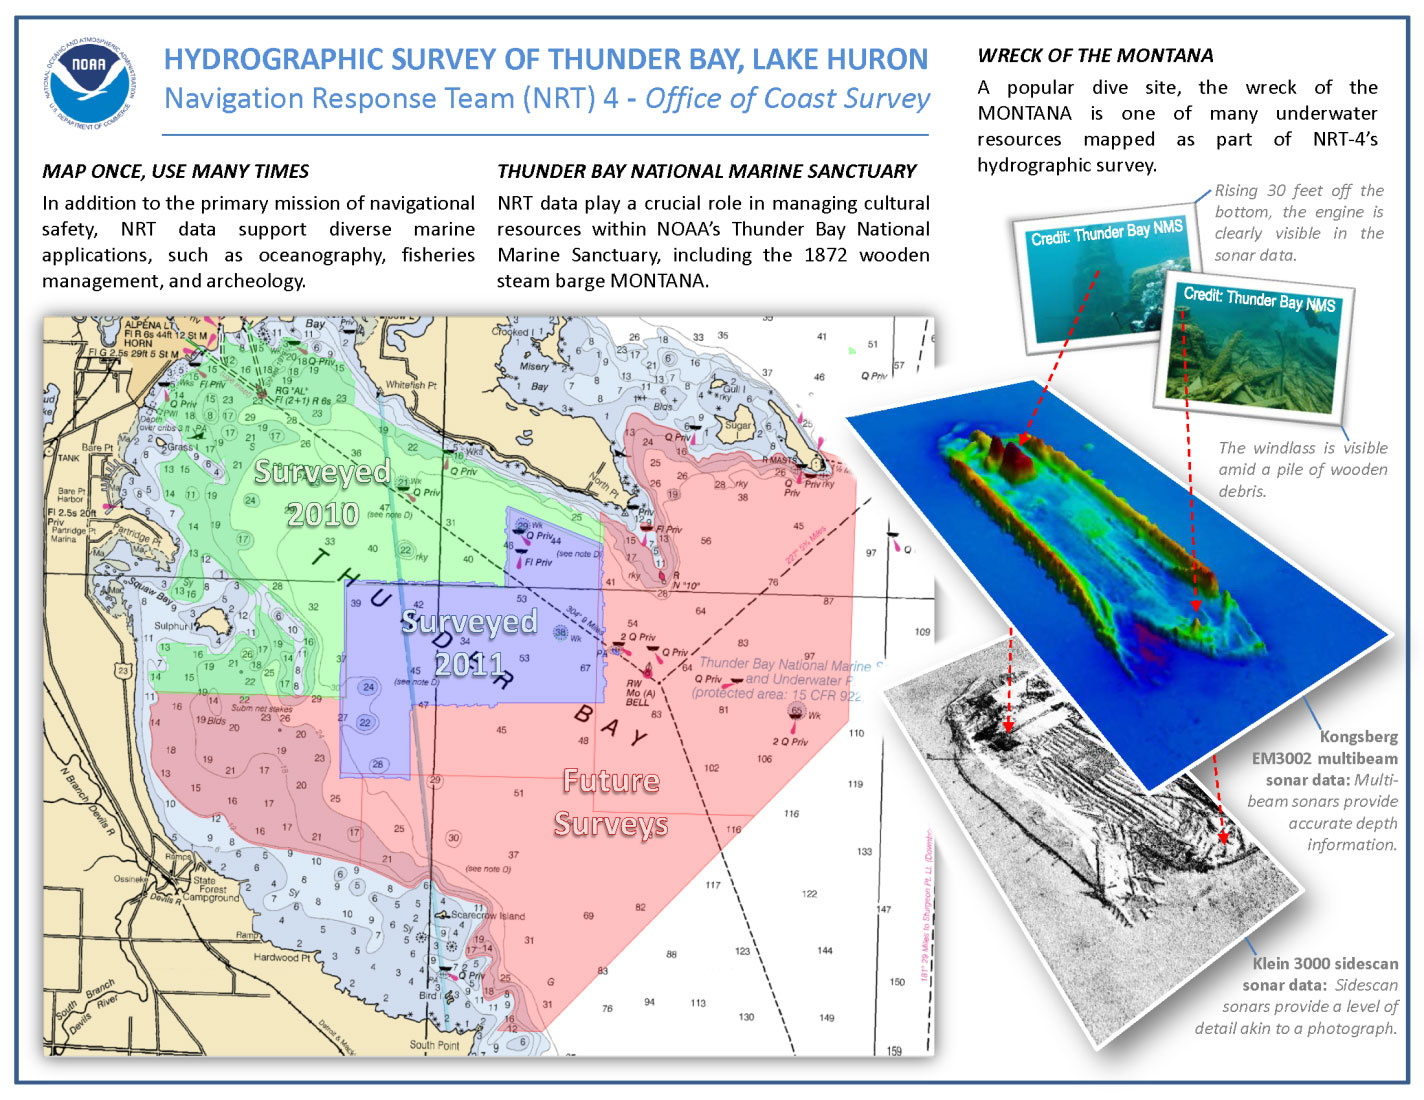 Figure 55. Working with other NOAA offices helps the sanctuary acquire data useful for sanctuary resource management. The data is also shared with a variety of scientists and institutions interested in the natural and ecological aspects of Thunder Bay. (NOAA Office of Coast Survey)